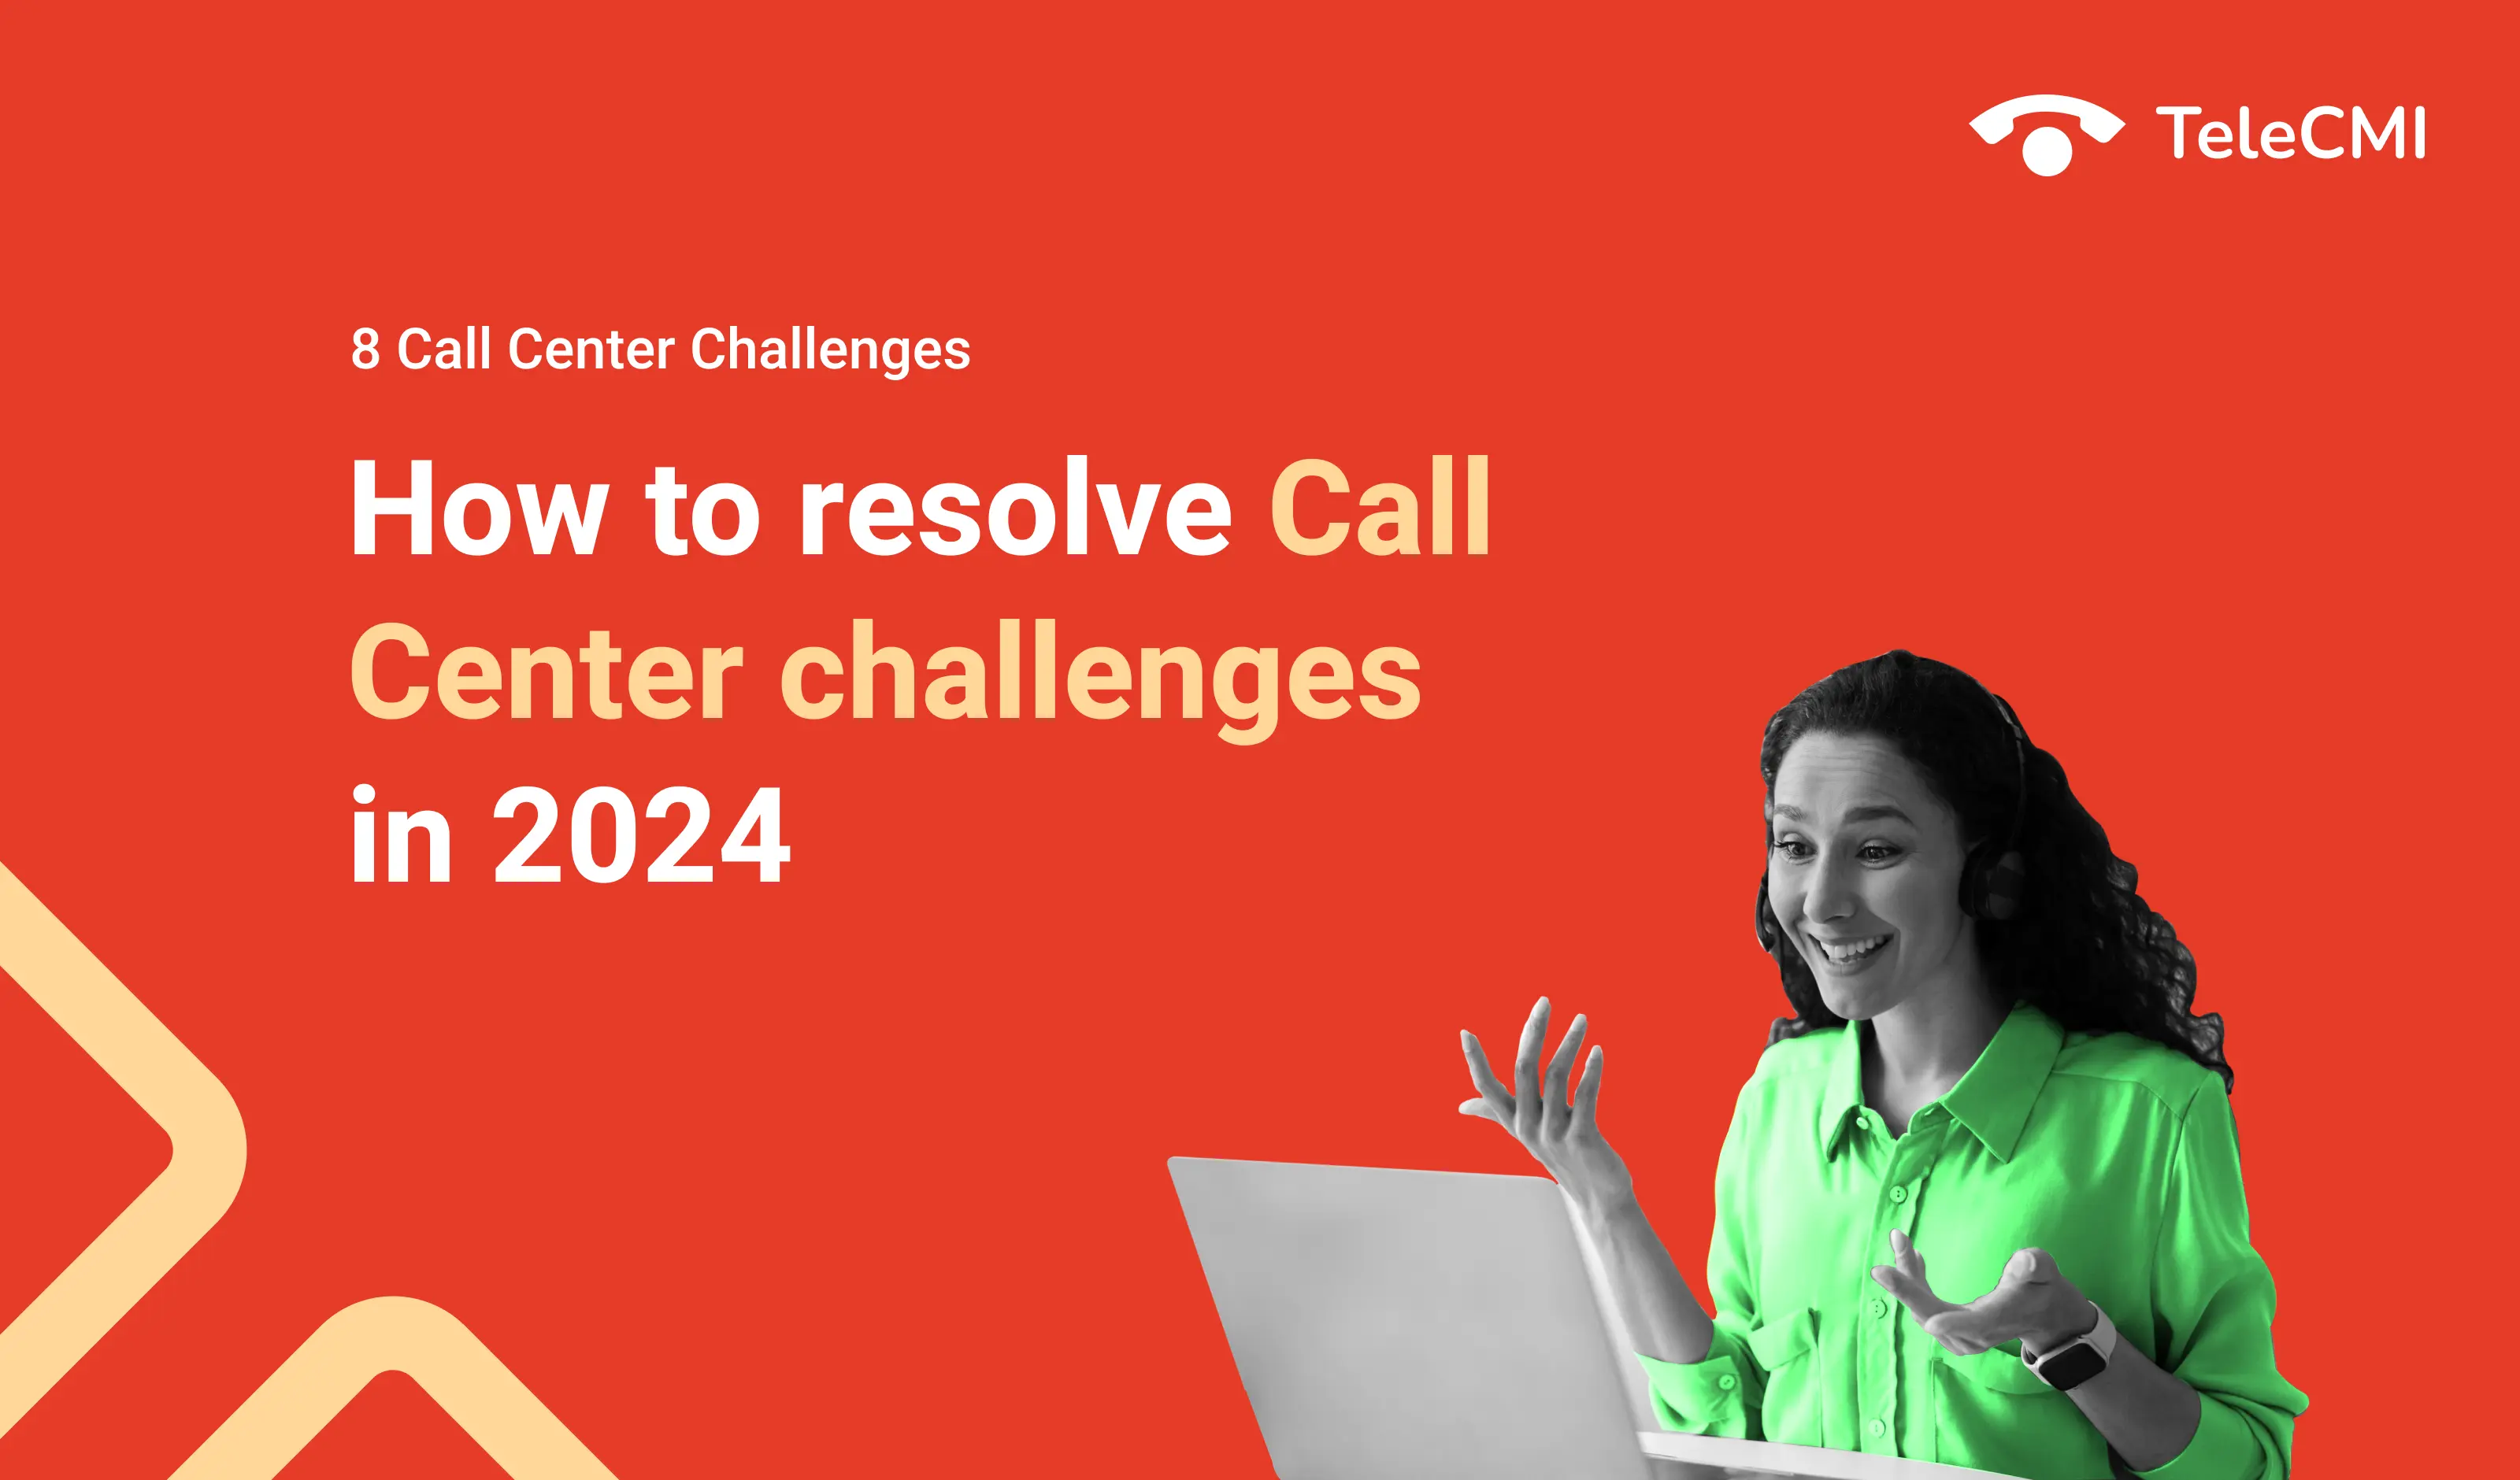 8 Call Center Challenges and How to resolve them in 2024